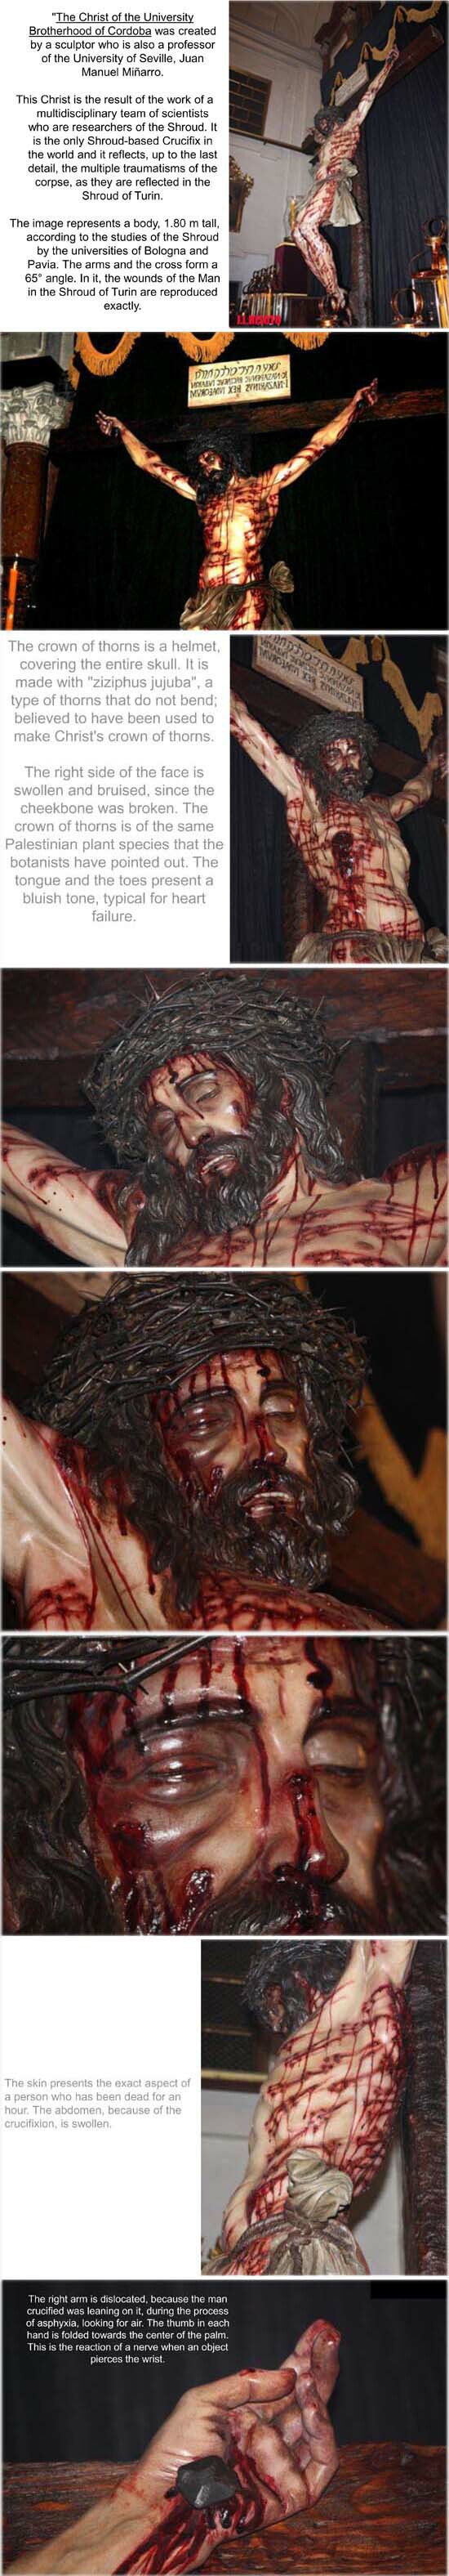 pictures of the crucified Christ